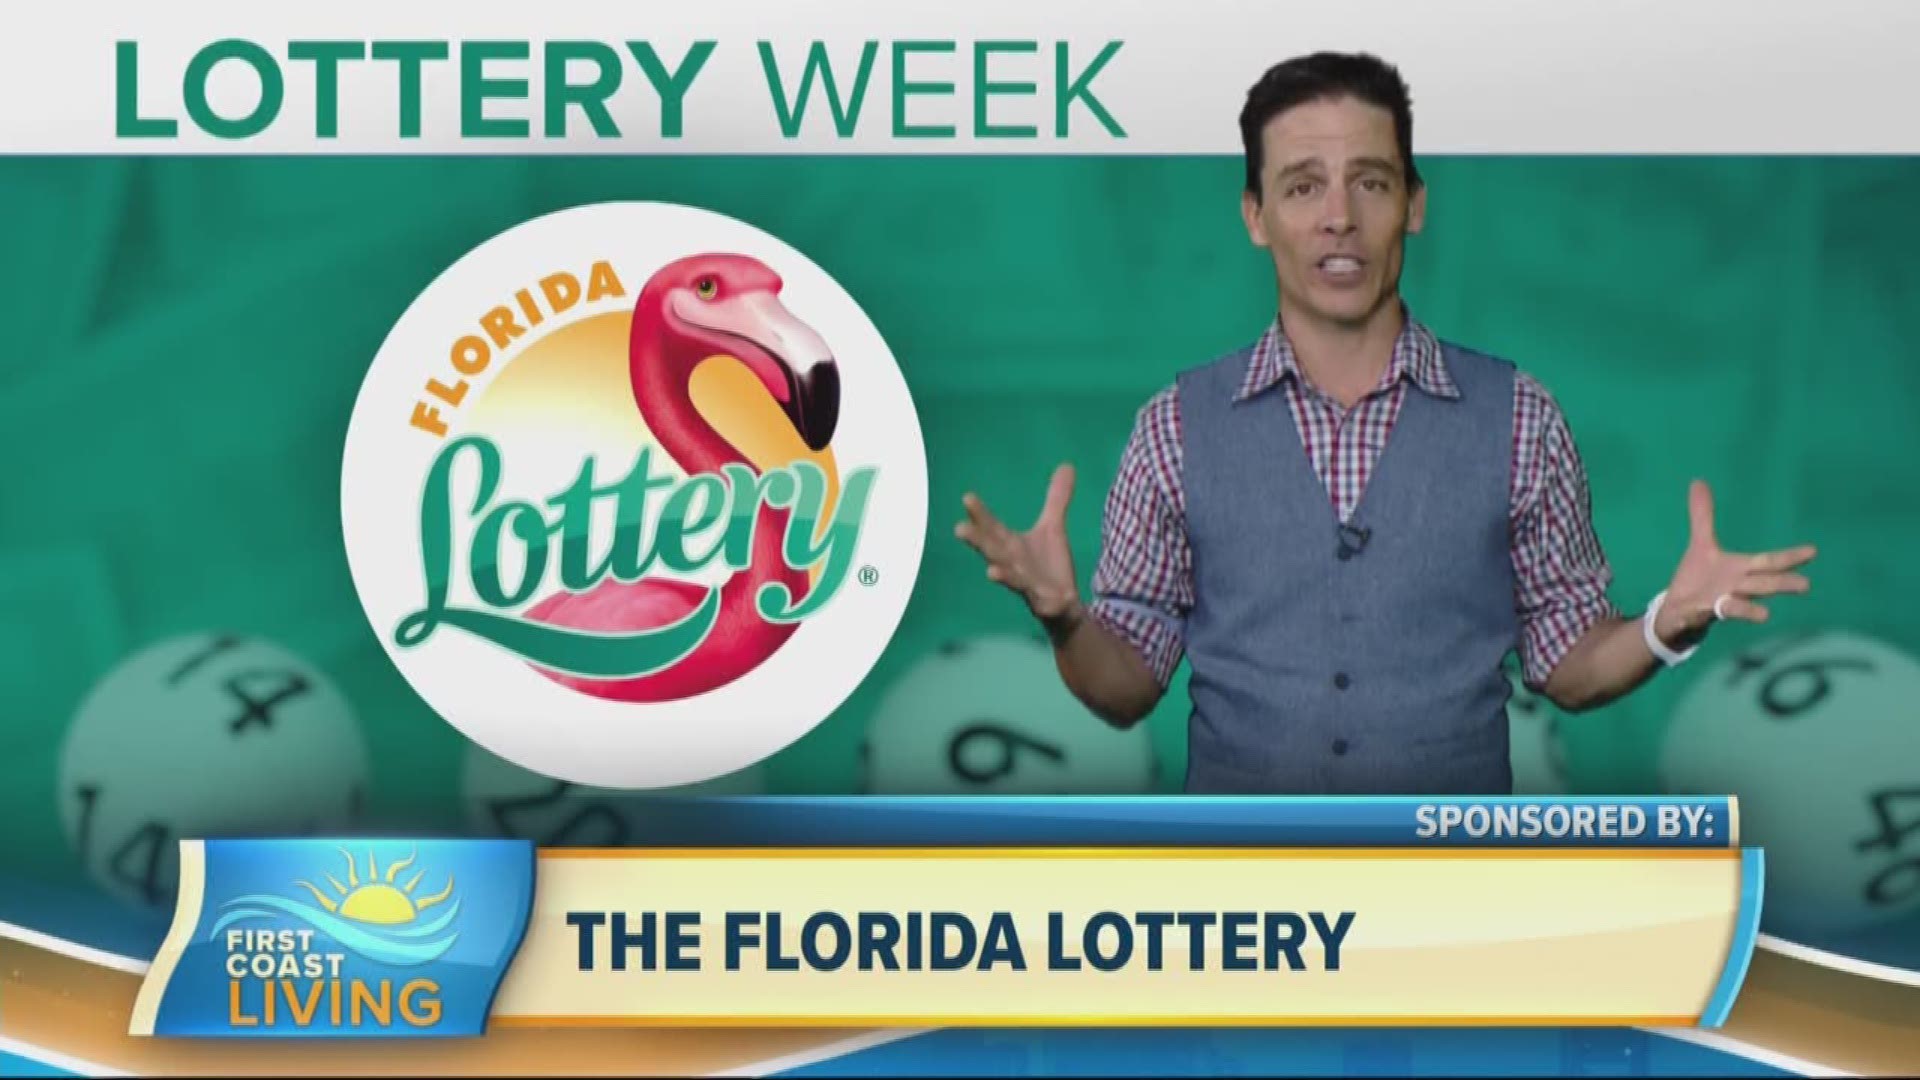 Celebrate Lottery Week with these fun facts about the Florida Lottery